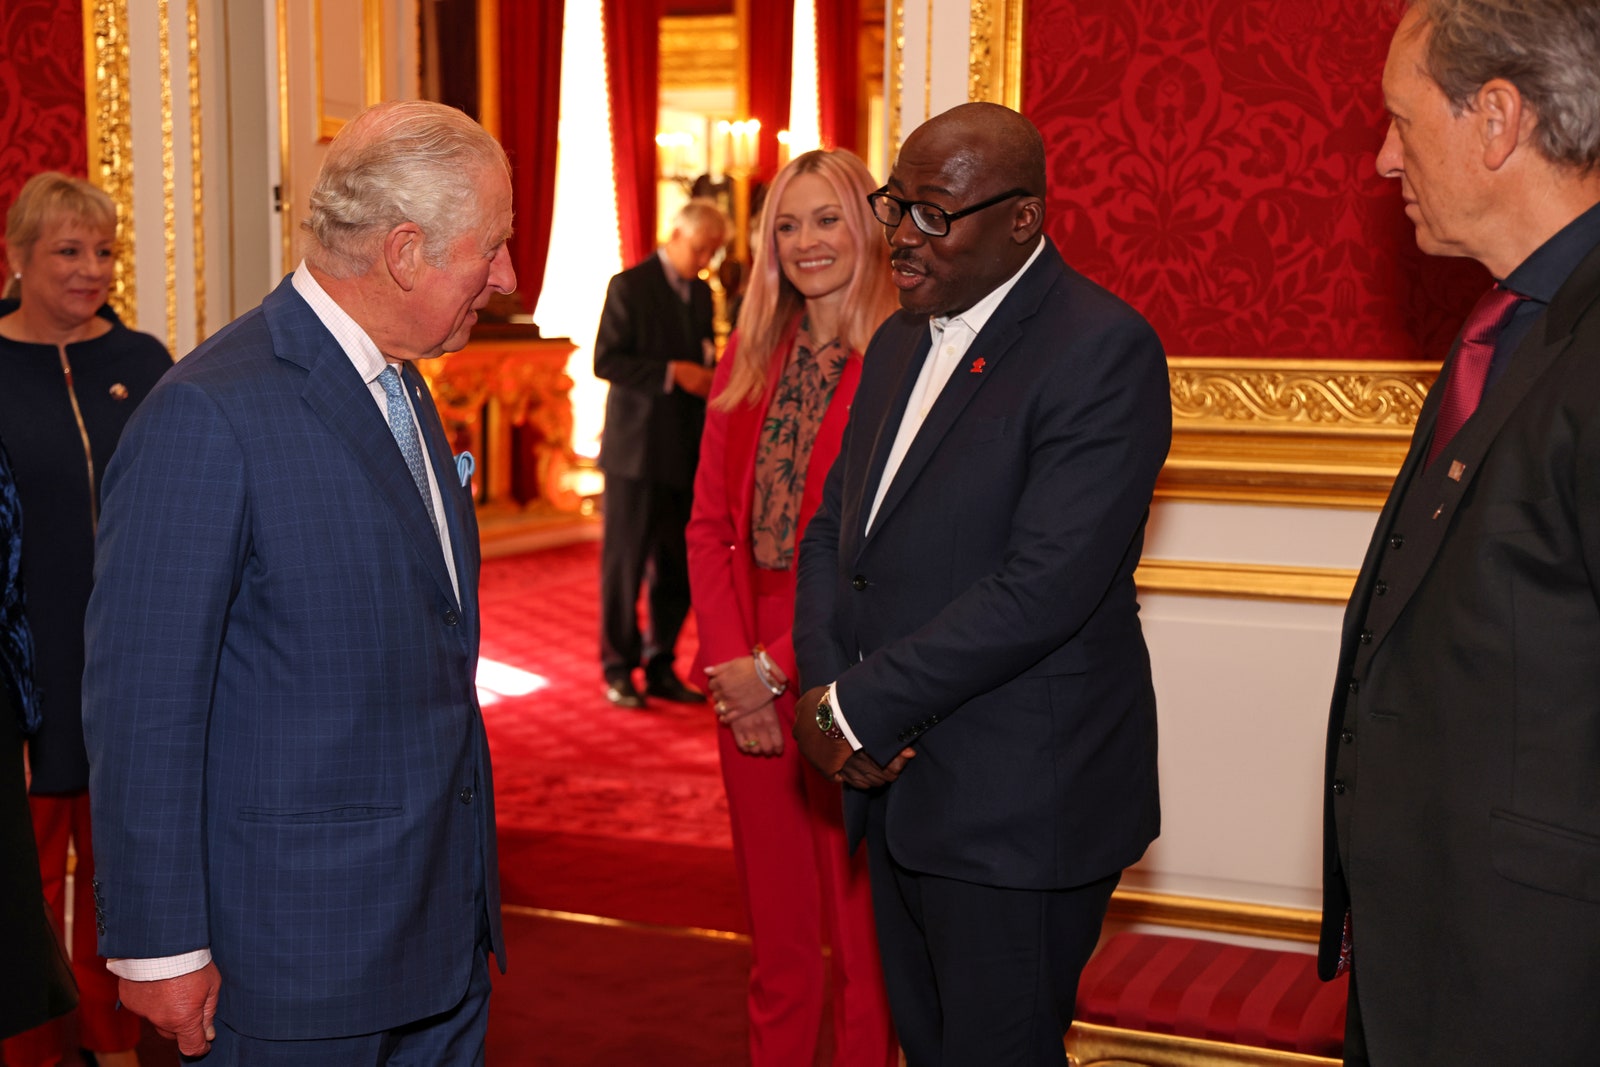 King Charles and Edward Enninful during the Prince’s Trust Awards Trophy Ceremony at St James’s Palace in October 2021.